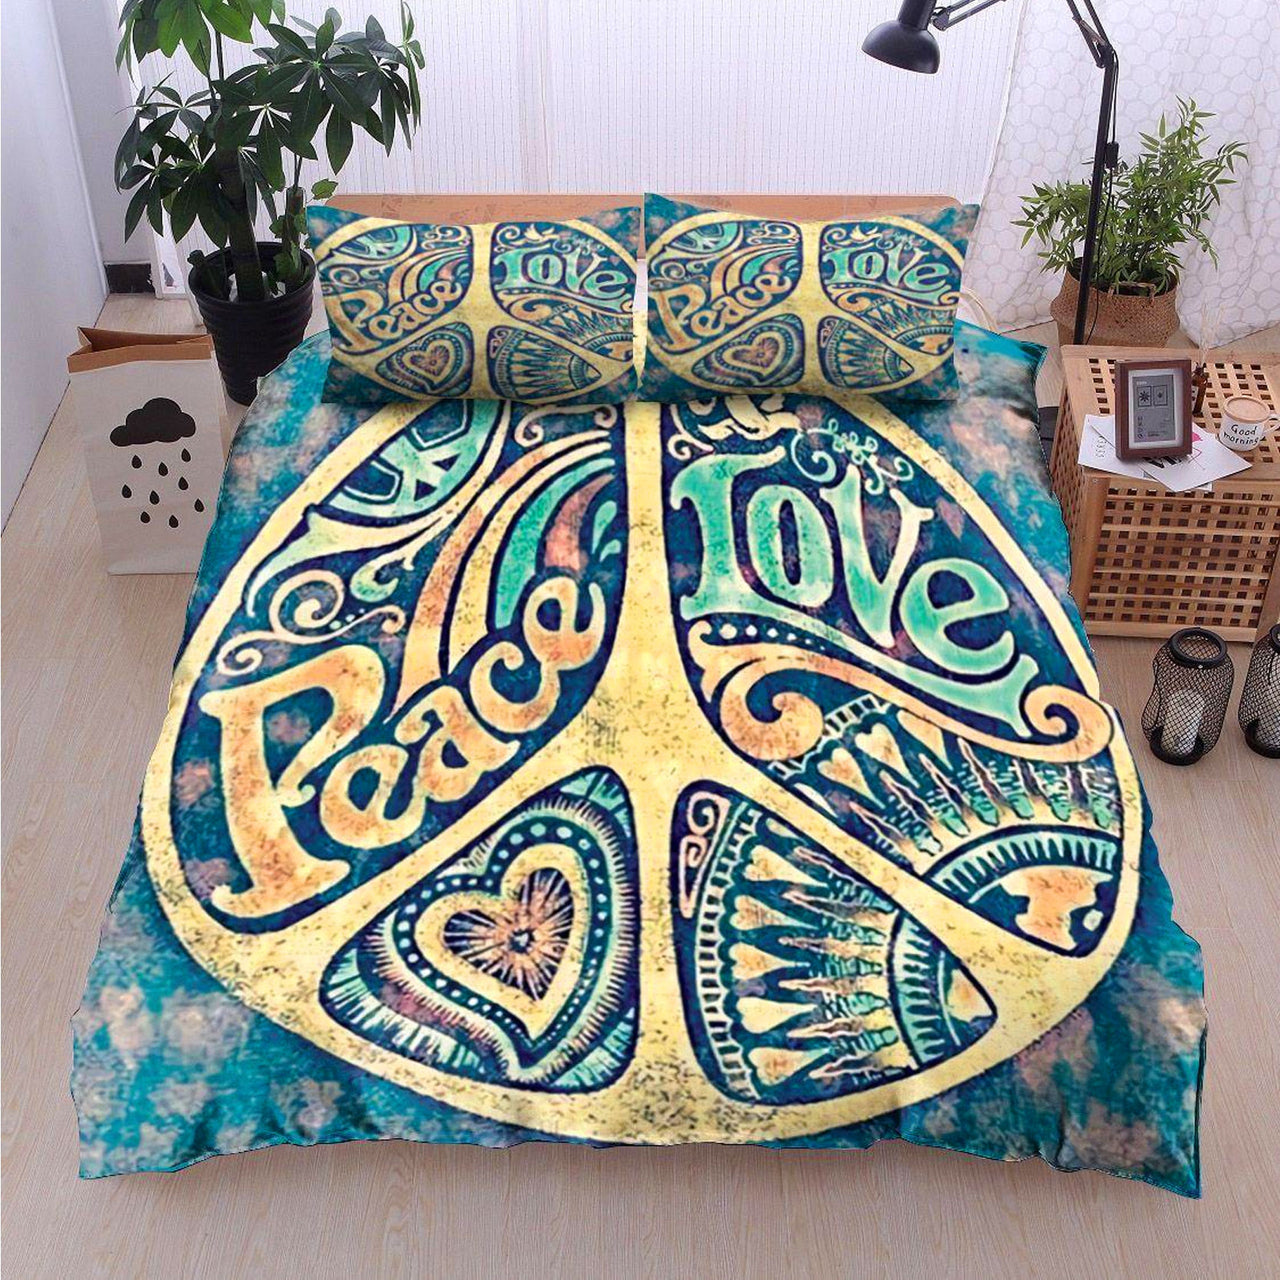 Comforter Hippie Peace and Love Pacifist Colorful Custom Bedding Set for Kids Teens Adult Premium Bed Set